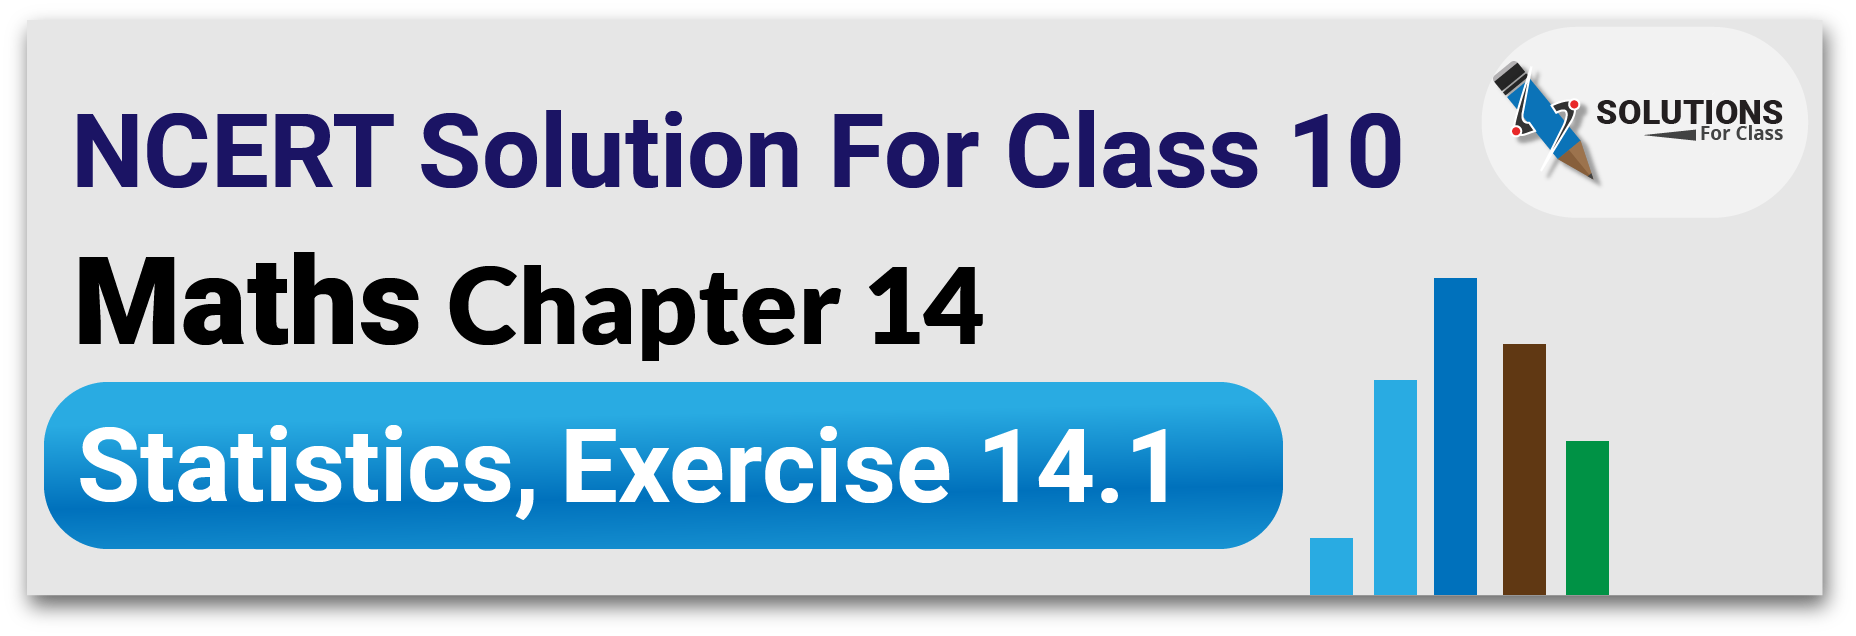 NCERT Solutions For Class 10, Maths, Chapter 14, Statistics, Exercise 14.1